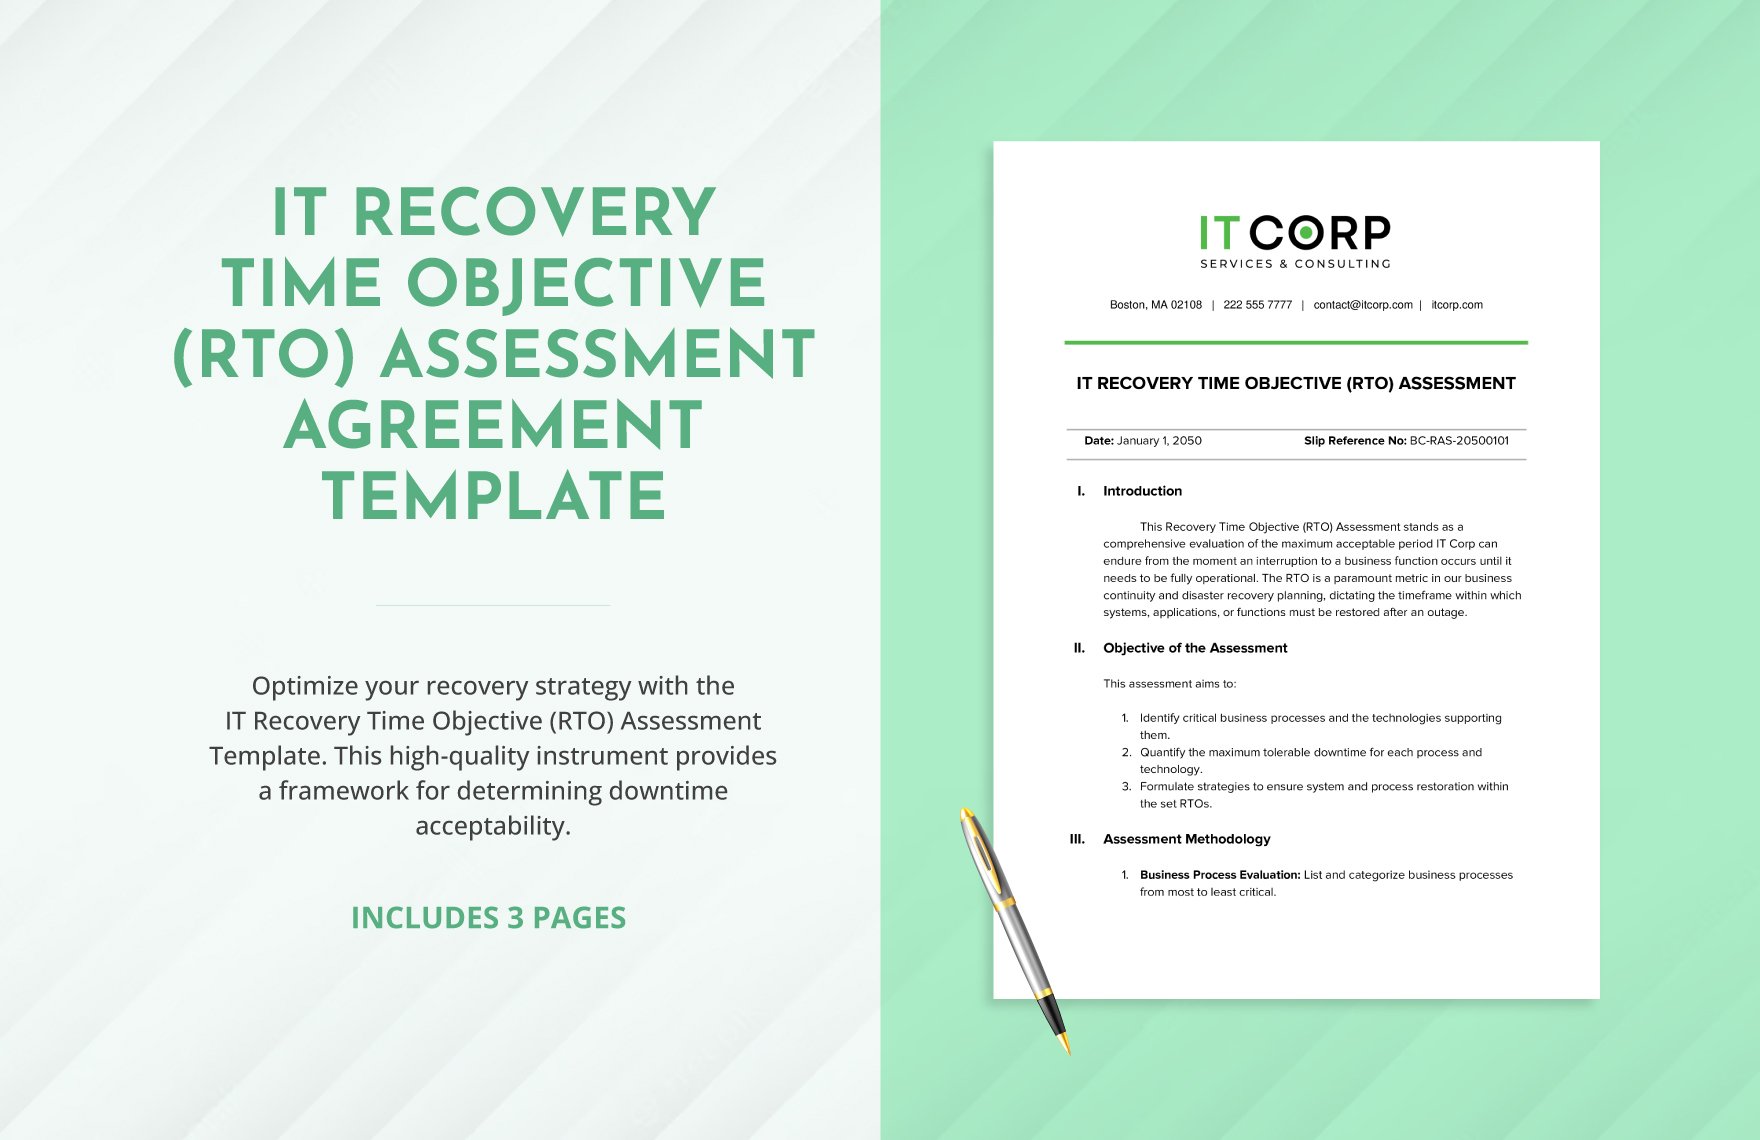 IT Recovery Time Objective (RTO) Assessment Template